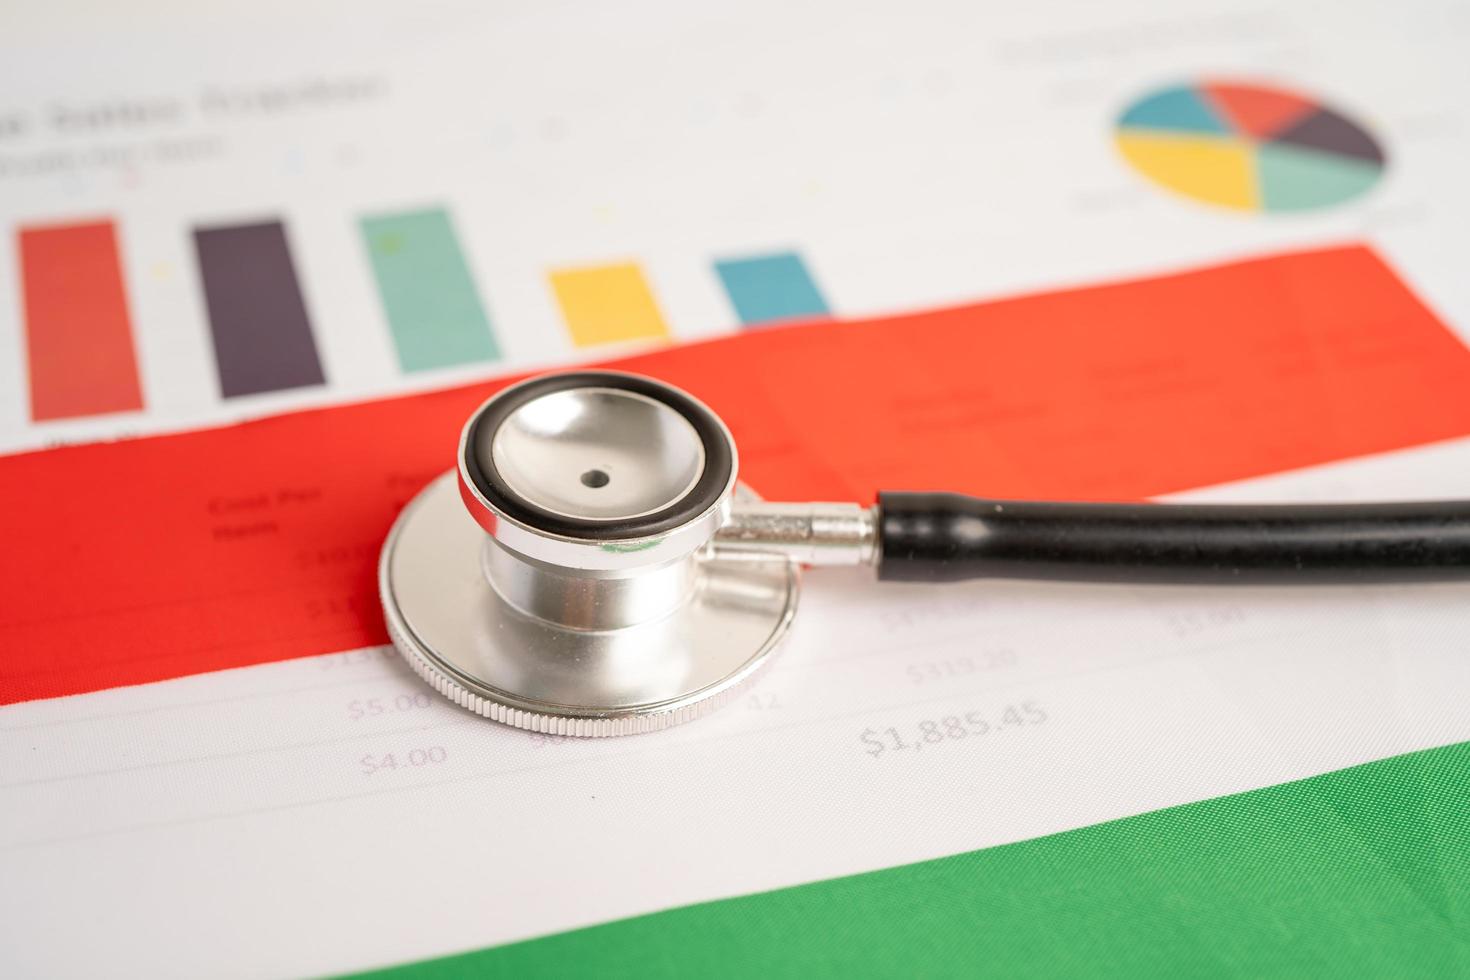 Black stethoscope on Hungary flag background, Business and finance concept. photo